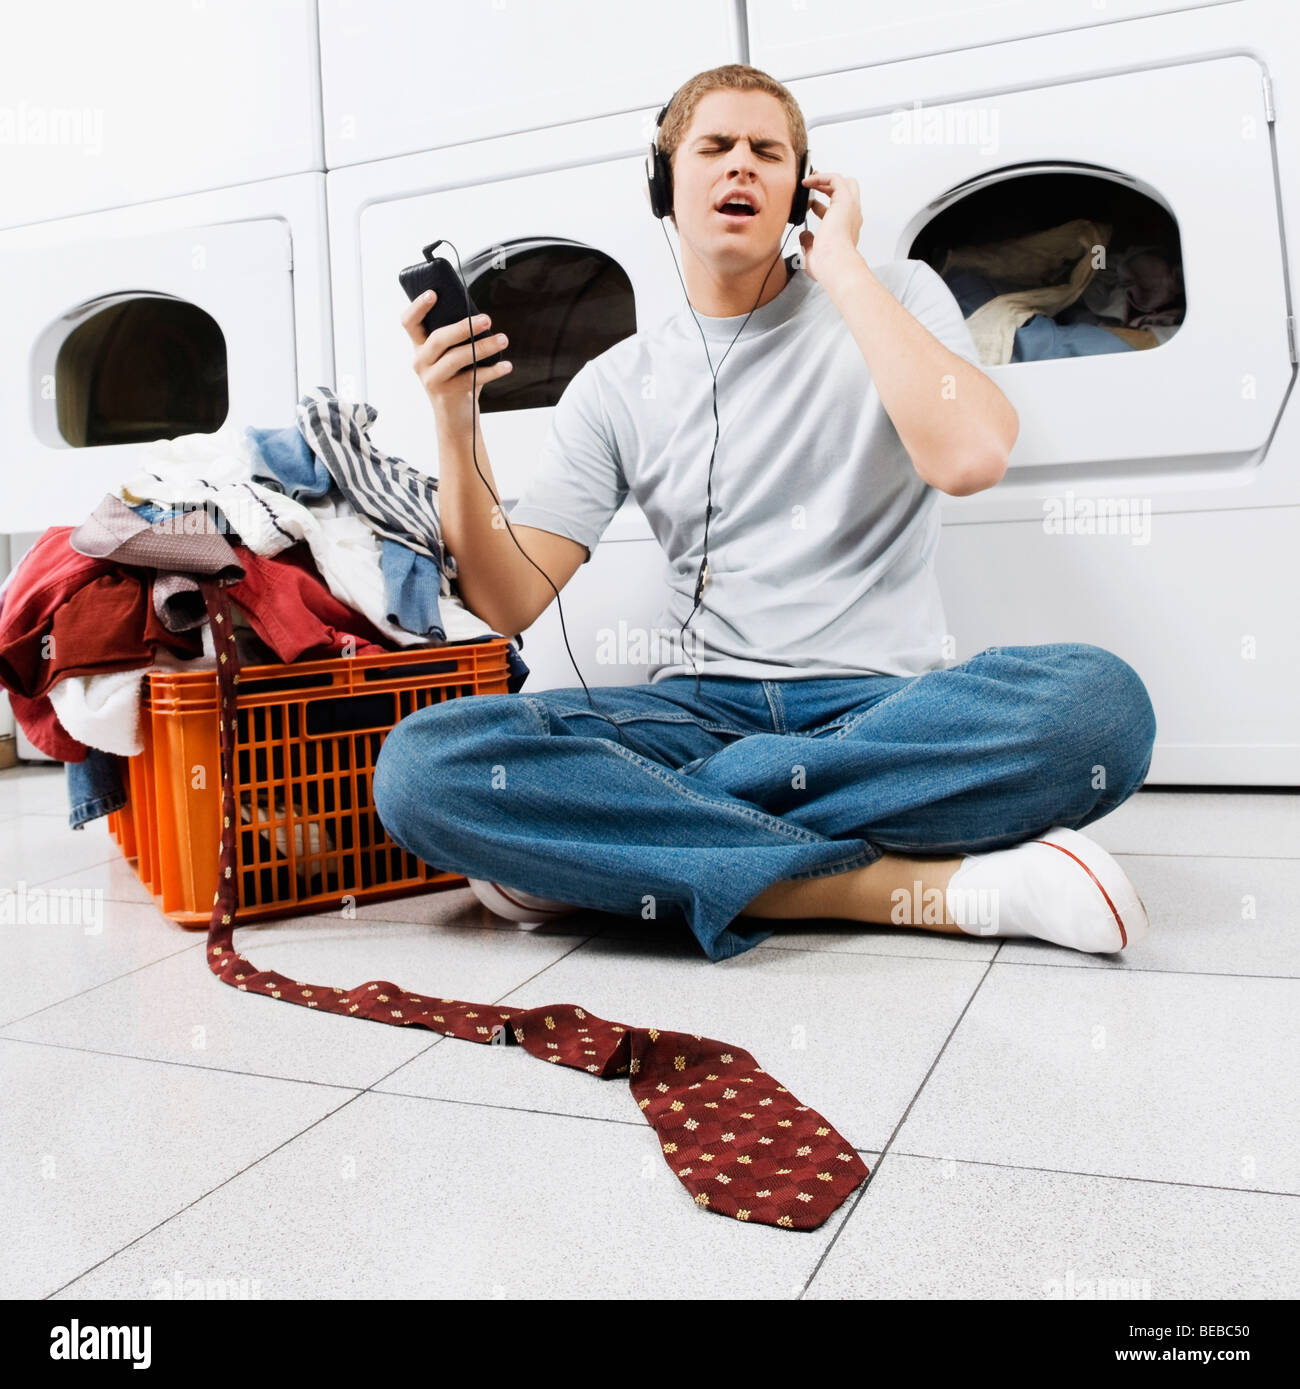 Man listening to an MP3 player in a laundromat Stock Photo